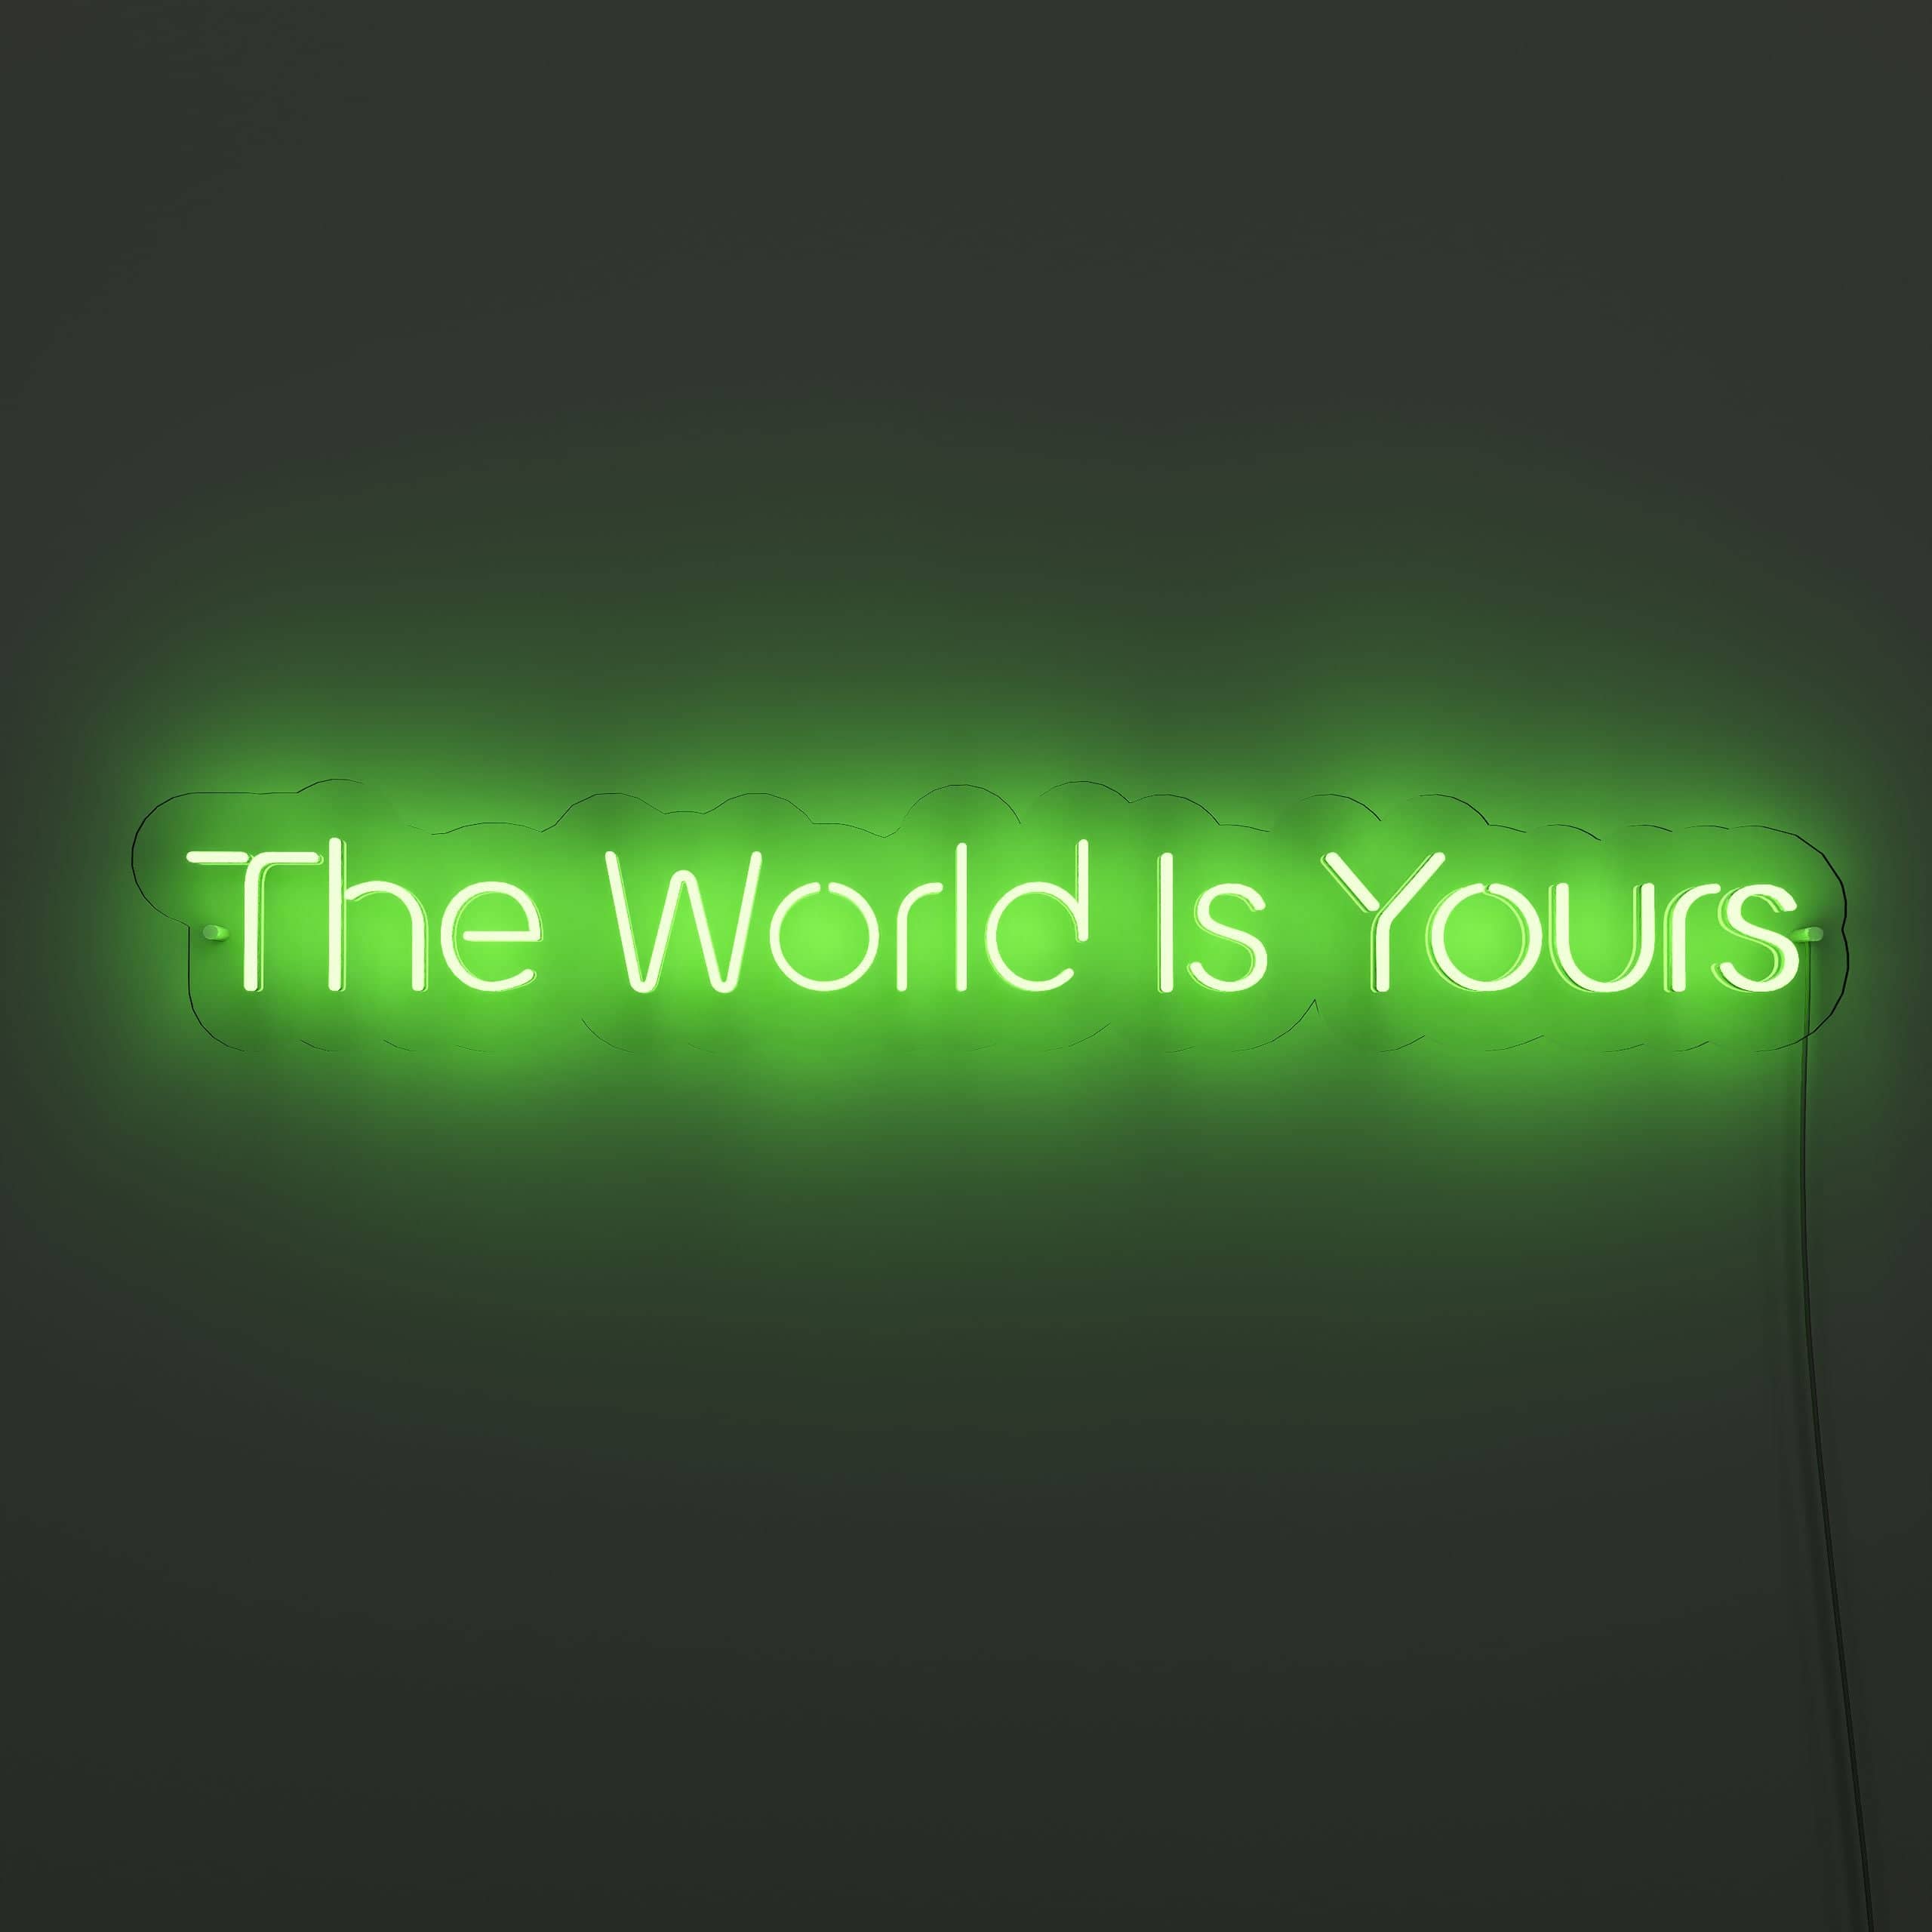 conquer-the-world-with-your-vision-and-ambition-neon-sign-lite